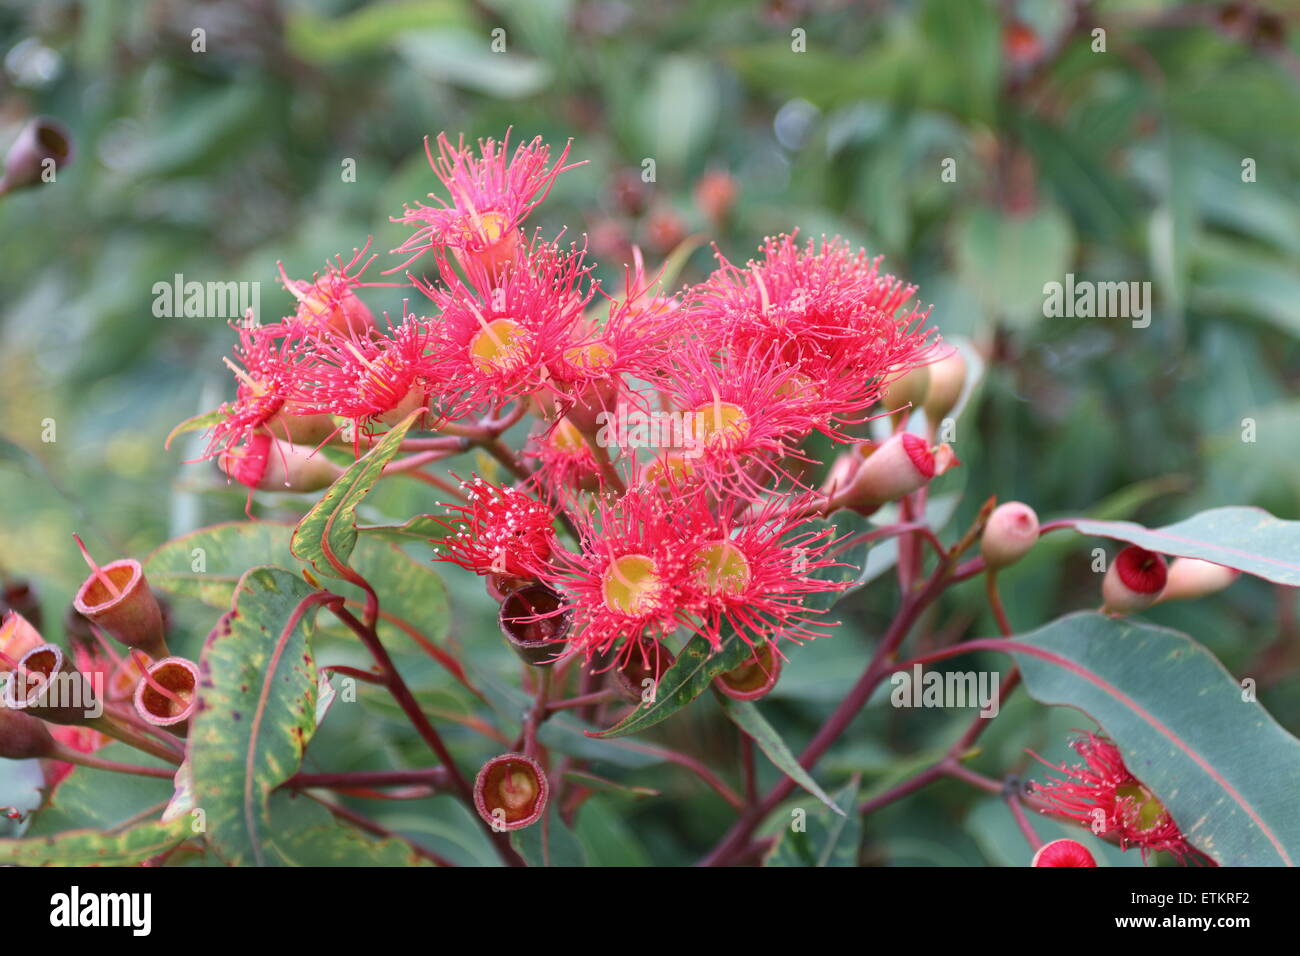 Red eucalyptus flowers blossoming Stock Photo